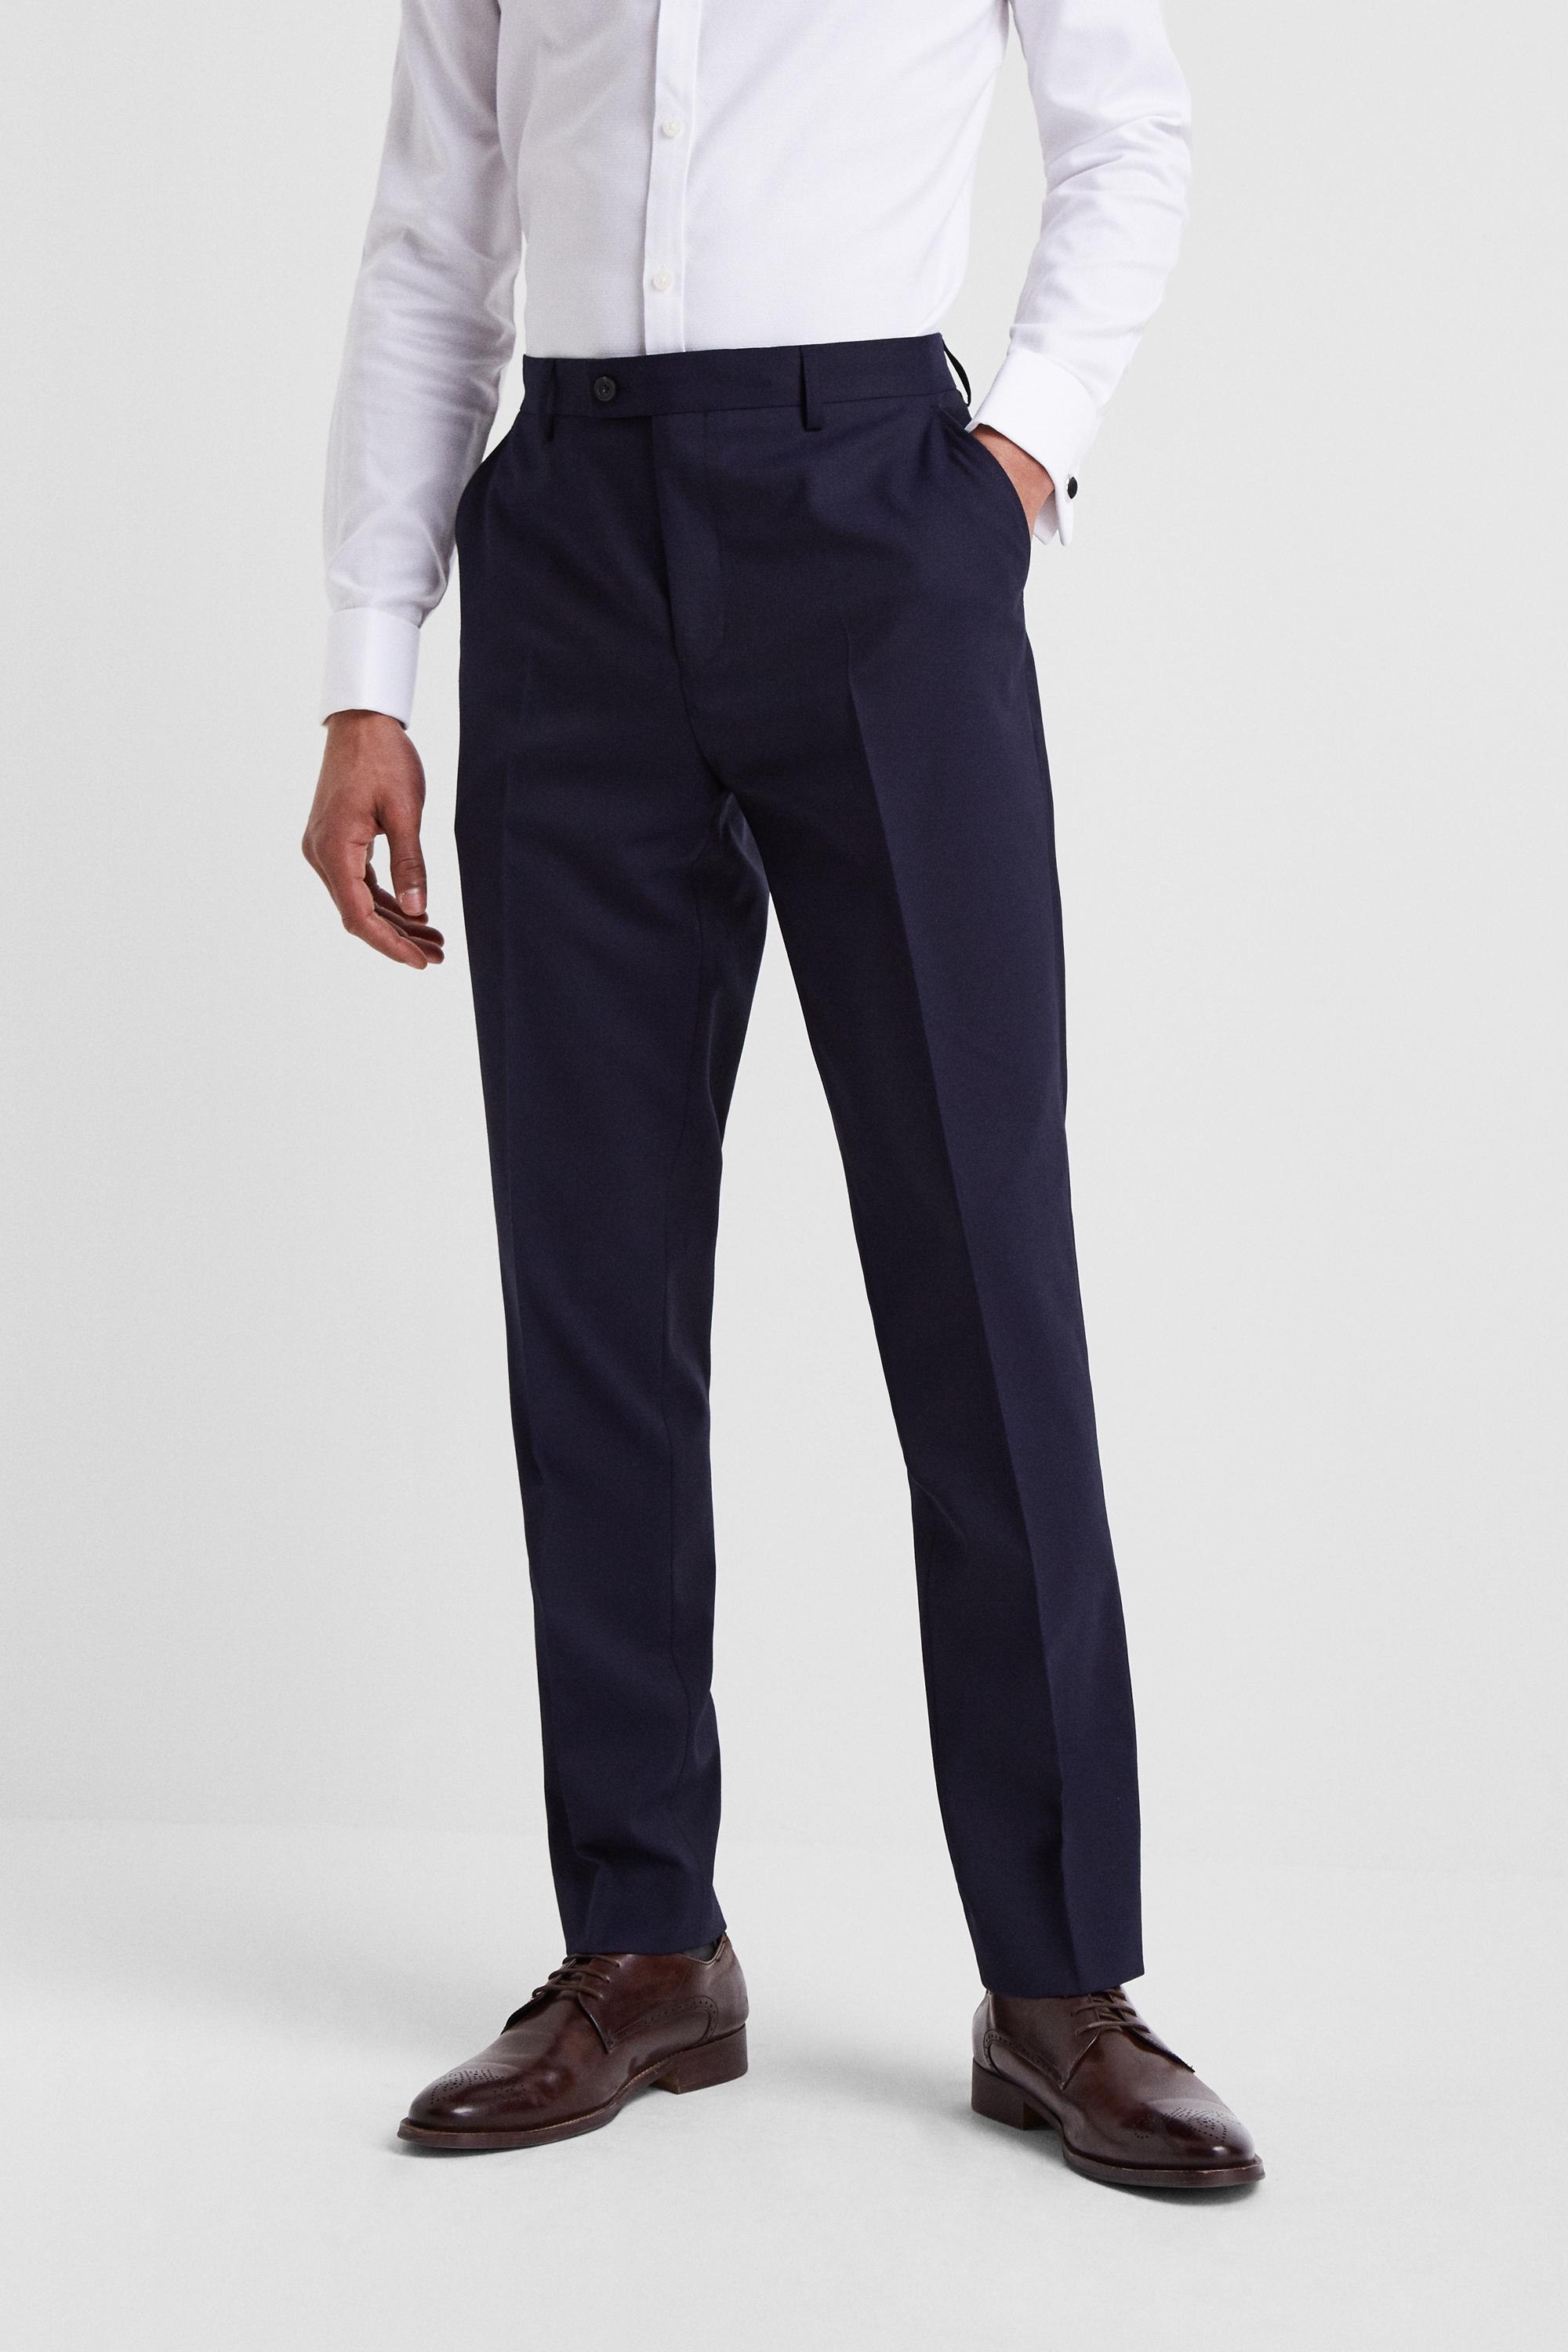 Ted Baker Wool Slim Fit Navy Twill Trousers in Blue for Men - Lyst